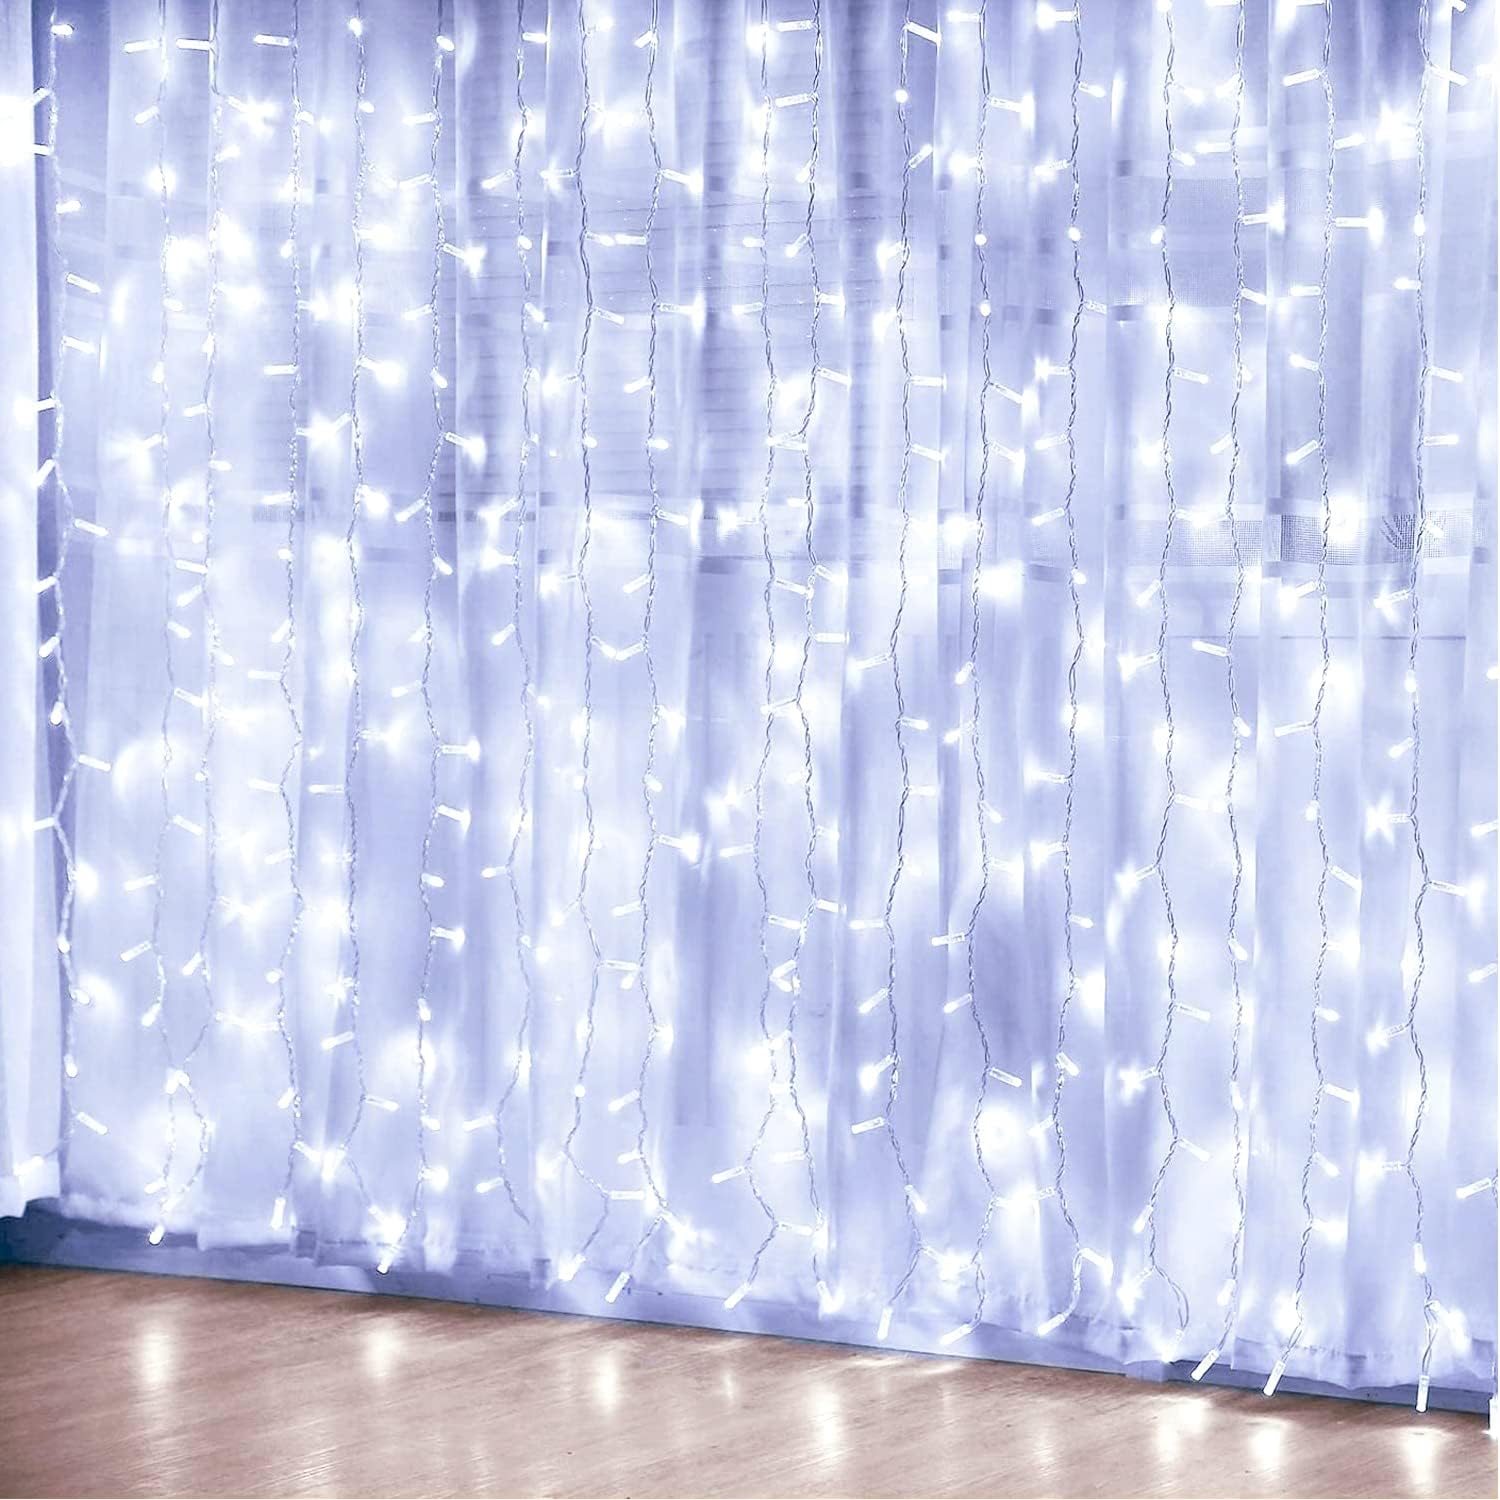 JMEXSUSS 300 LED White Curtain Lights Indoor with Remote, 8 Modes White Christmas String Lights Plug in, Curtain Lights for Wedding Reception Bedroom Wall Party Backdrop Window Decorations